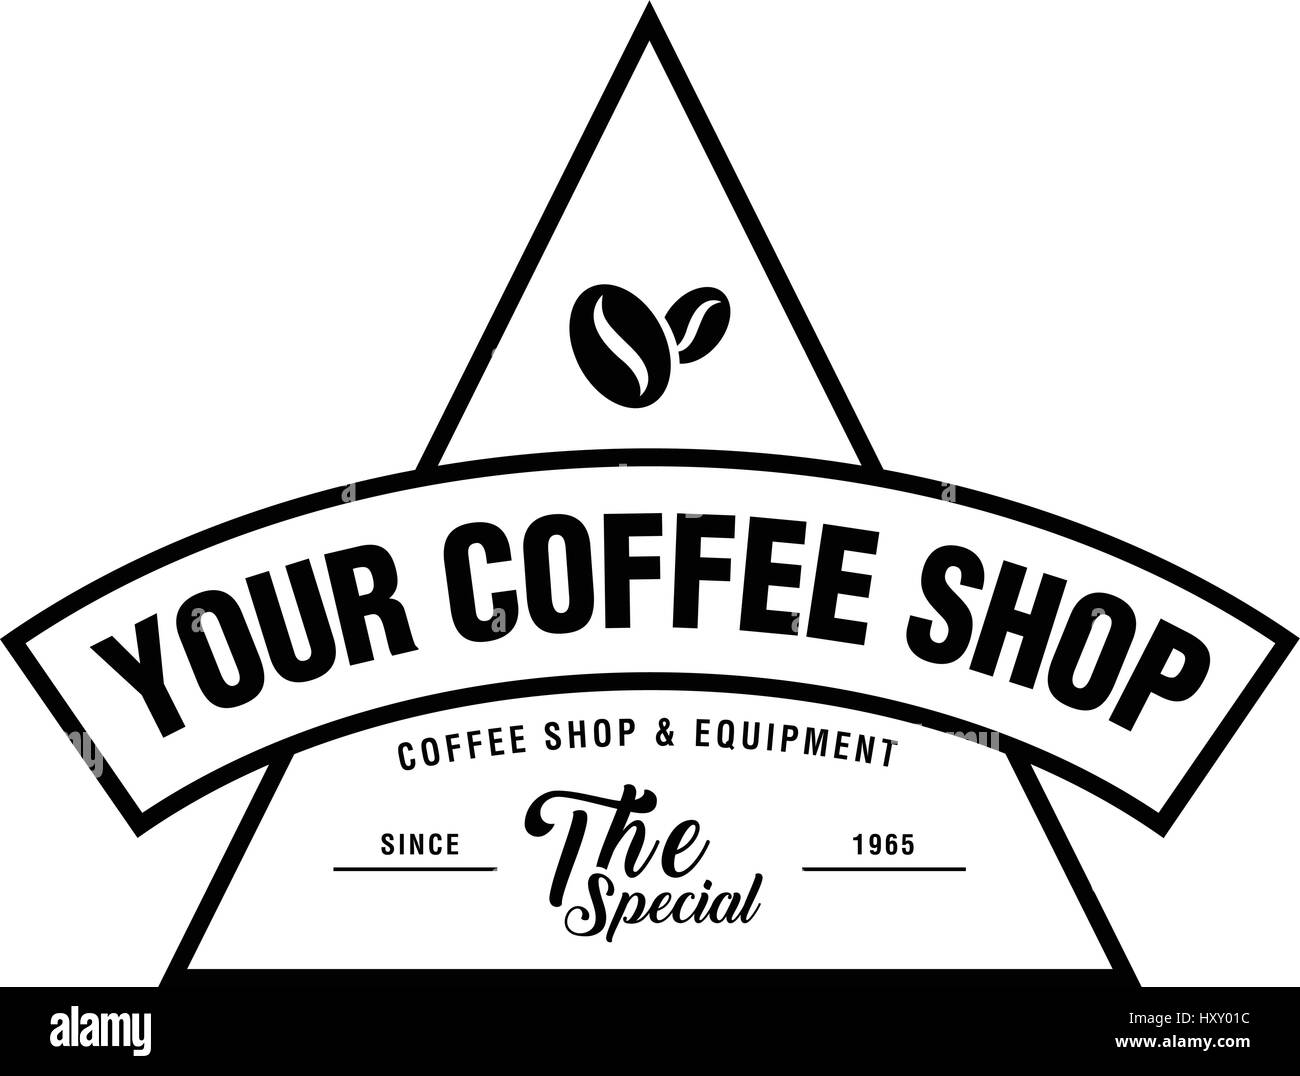 Coffee Shop Logo, Cup, beans, vintage style objects Stock Vector